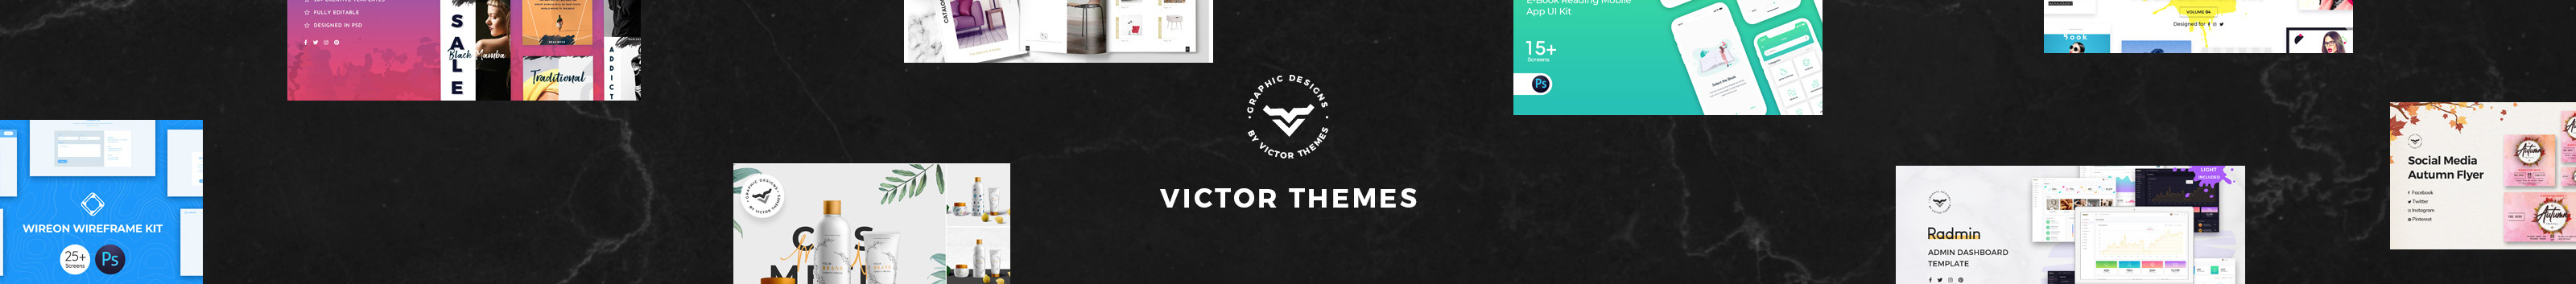 Victor Themes's profile banner